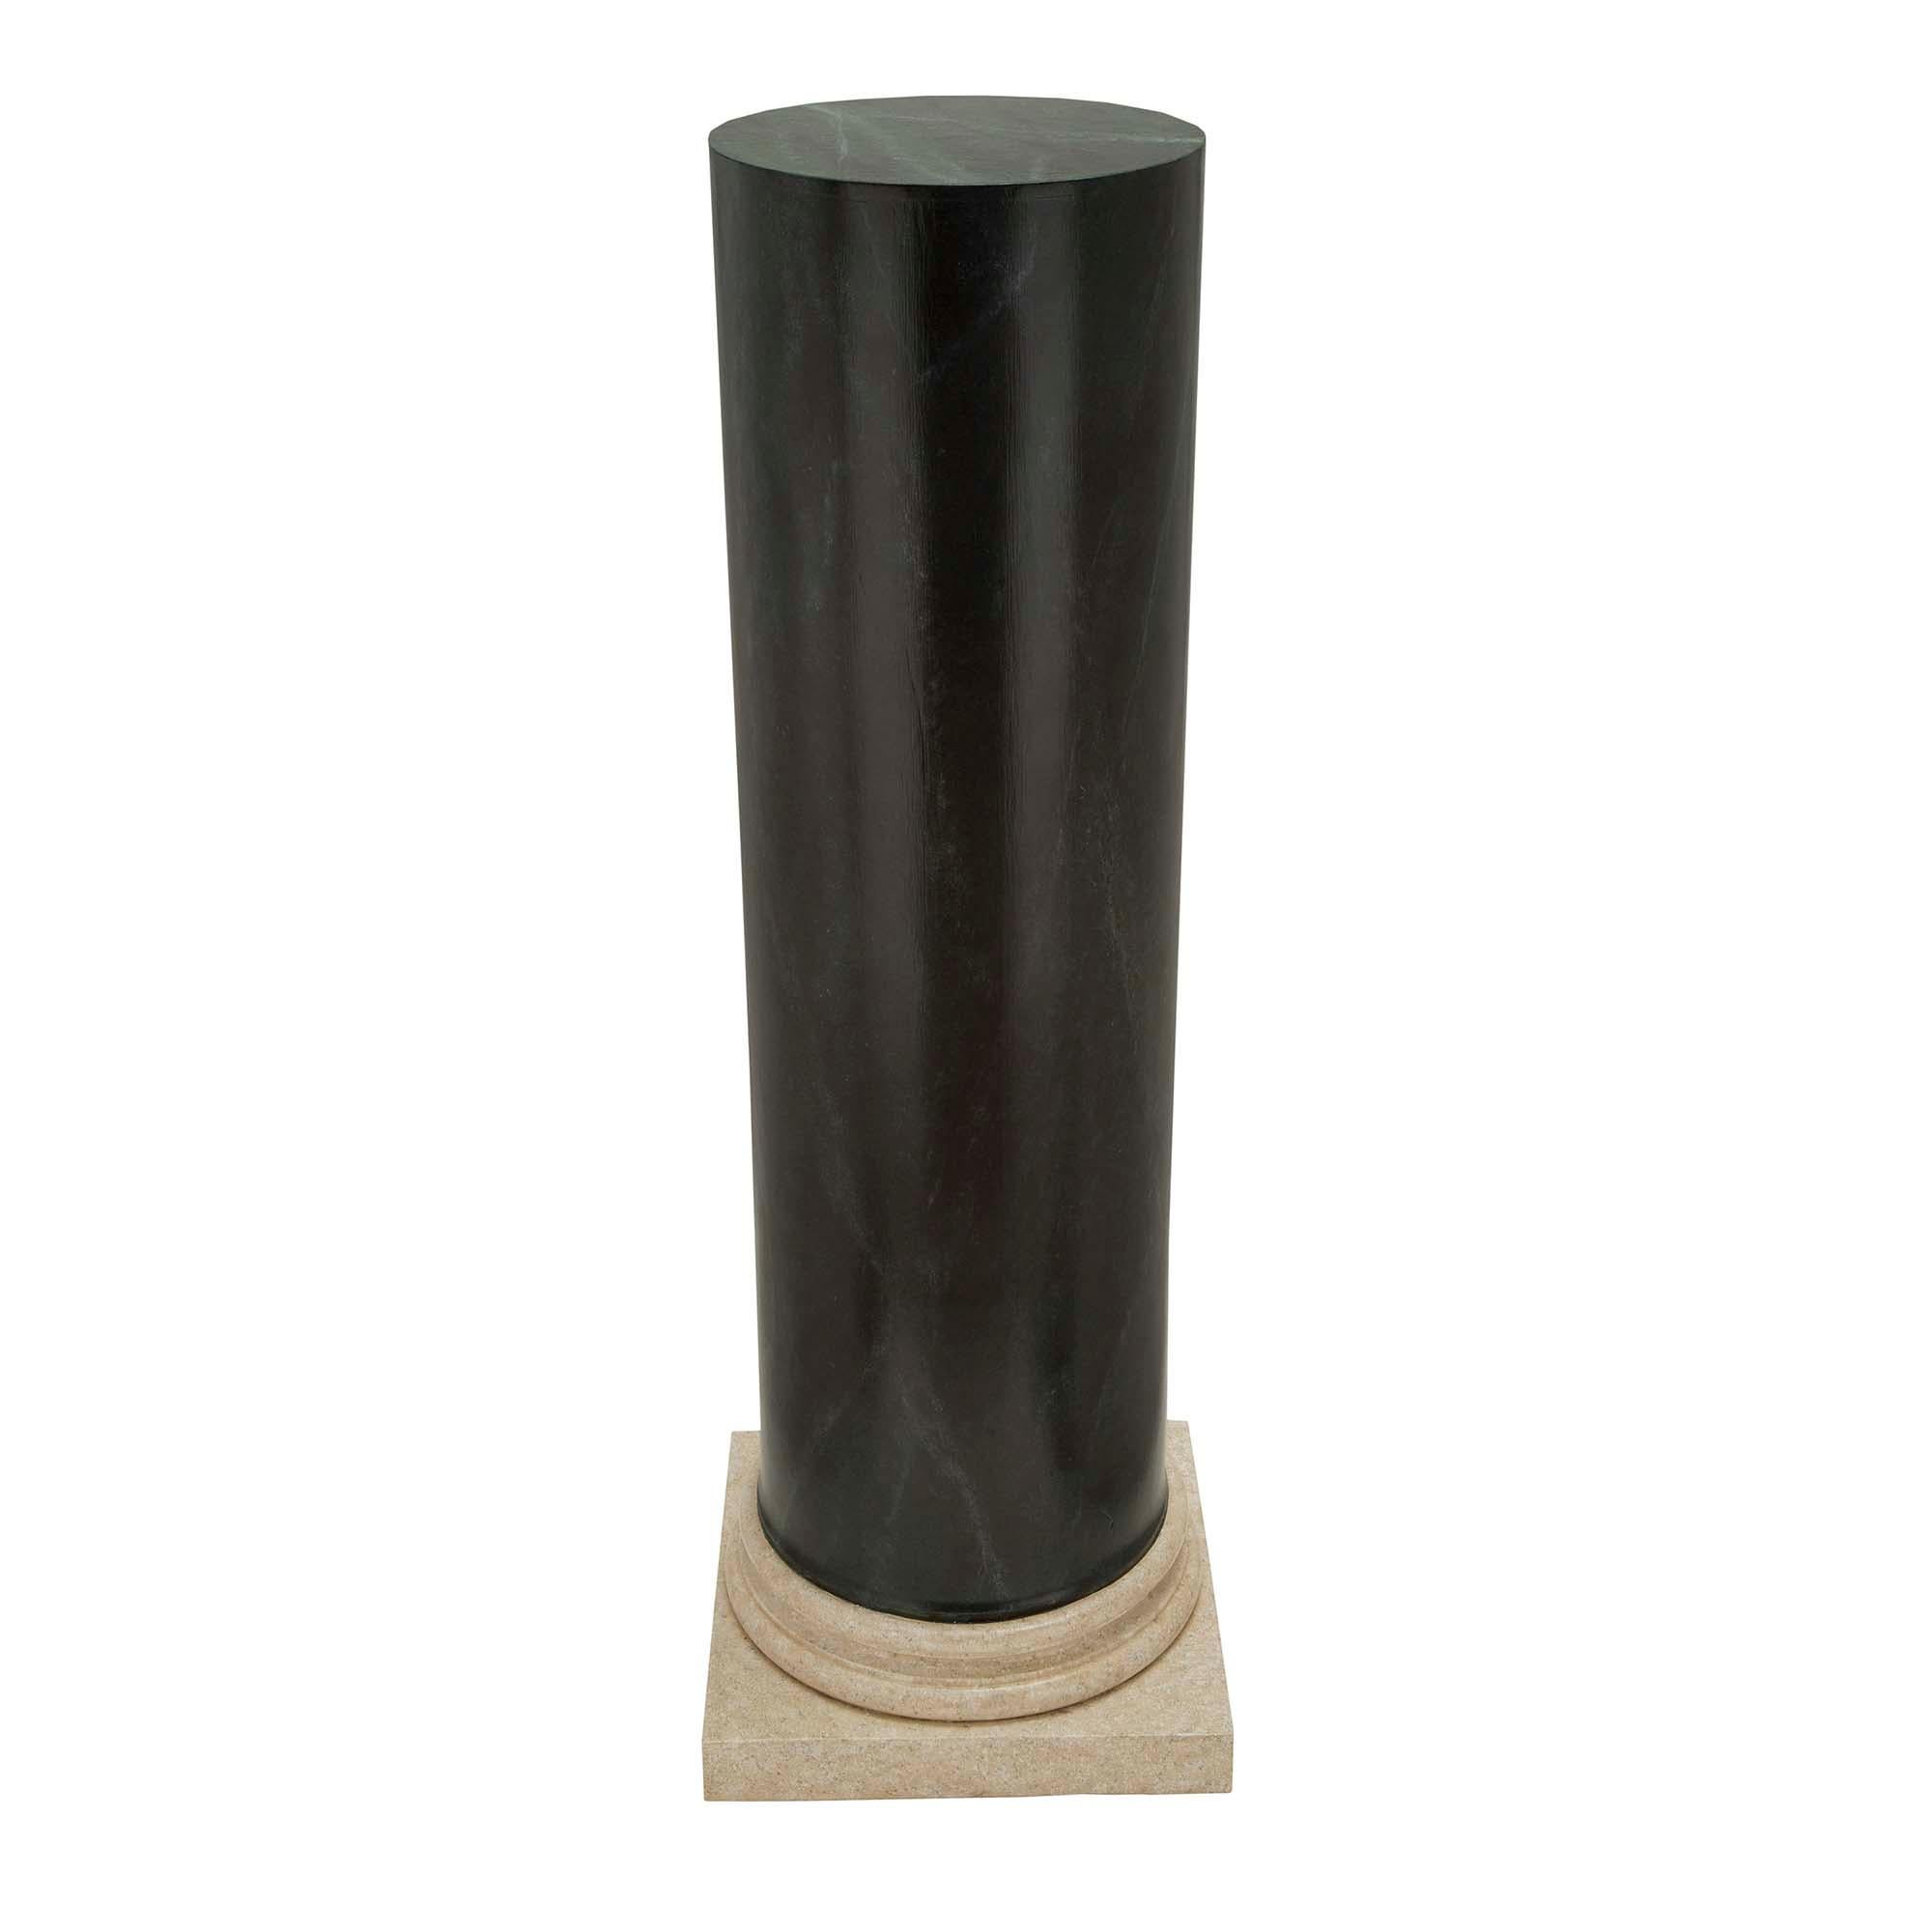 A pair of handsome and very decorative French turn of the century Neo-Classical st. faux painted columns. Each column is raised on an sand colored faux marble square base with a mottled circular support. The elegant tall columns are faux painted